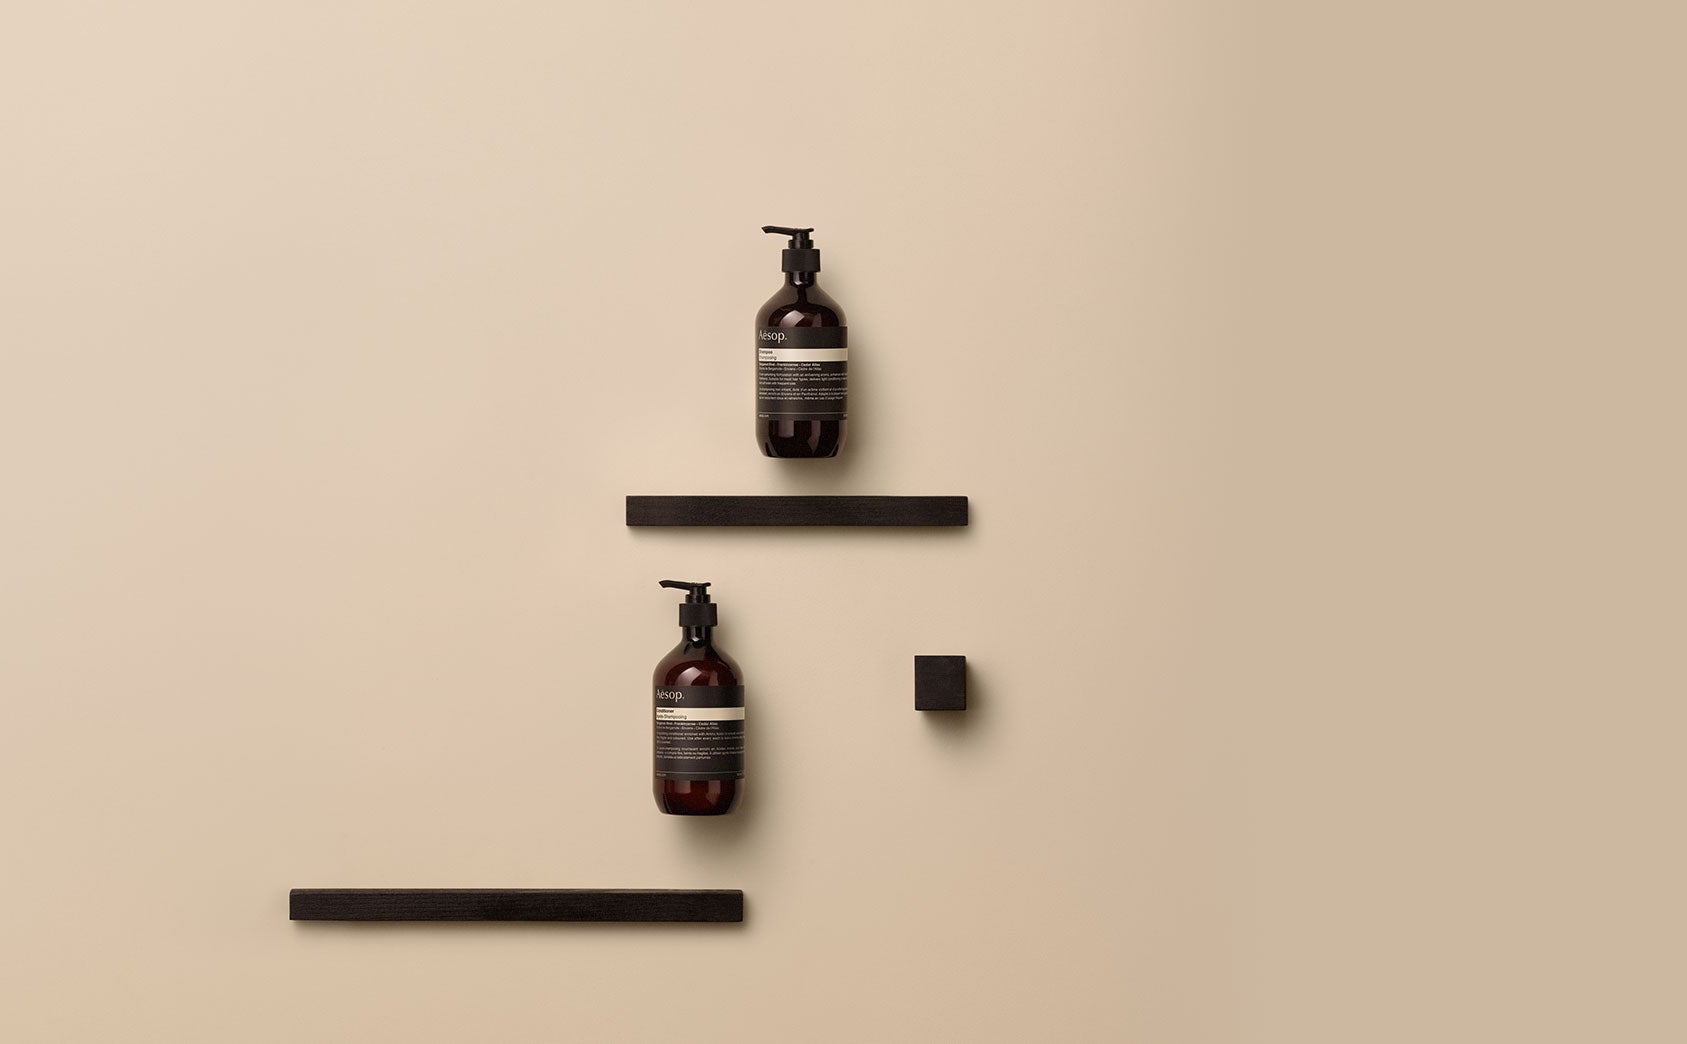 Aesop’s Shampoo And Conditioner a Staple Pair That Offers Gentle, Unfaltering Efficiency.